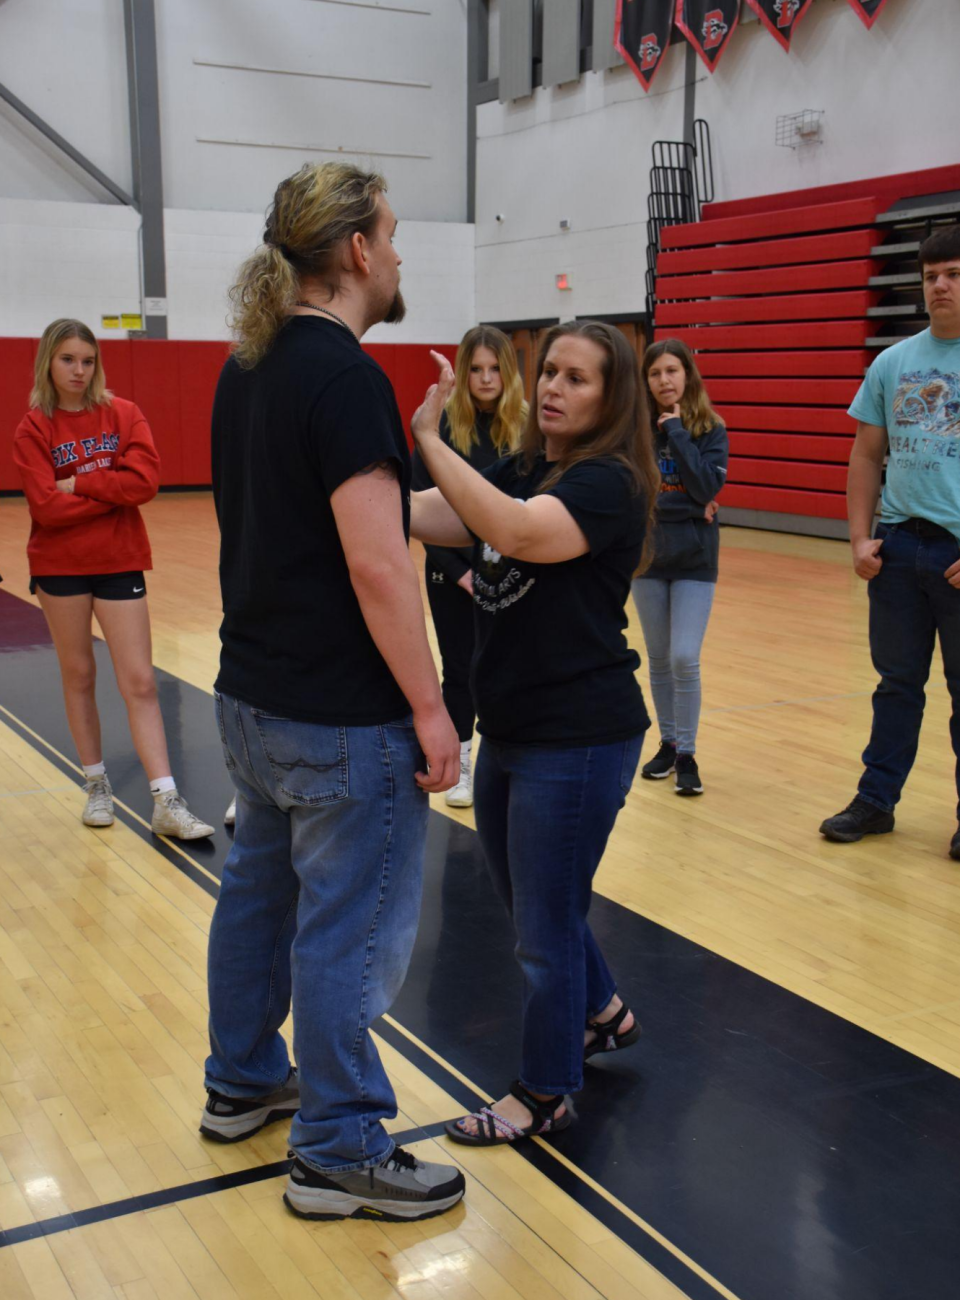 Dansville students receive self-defense instruction from Jennifer Smith and Eric Buchak of Empower Martial Arts in Geneseo.